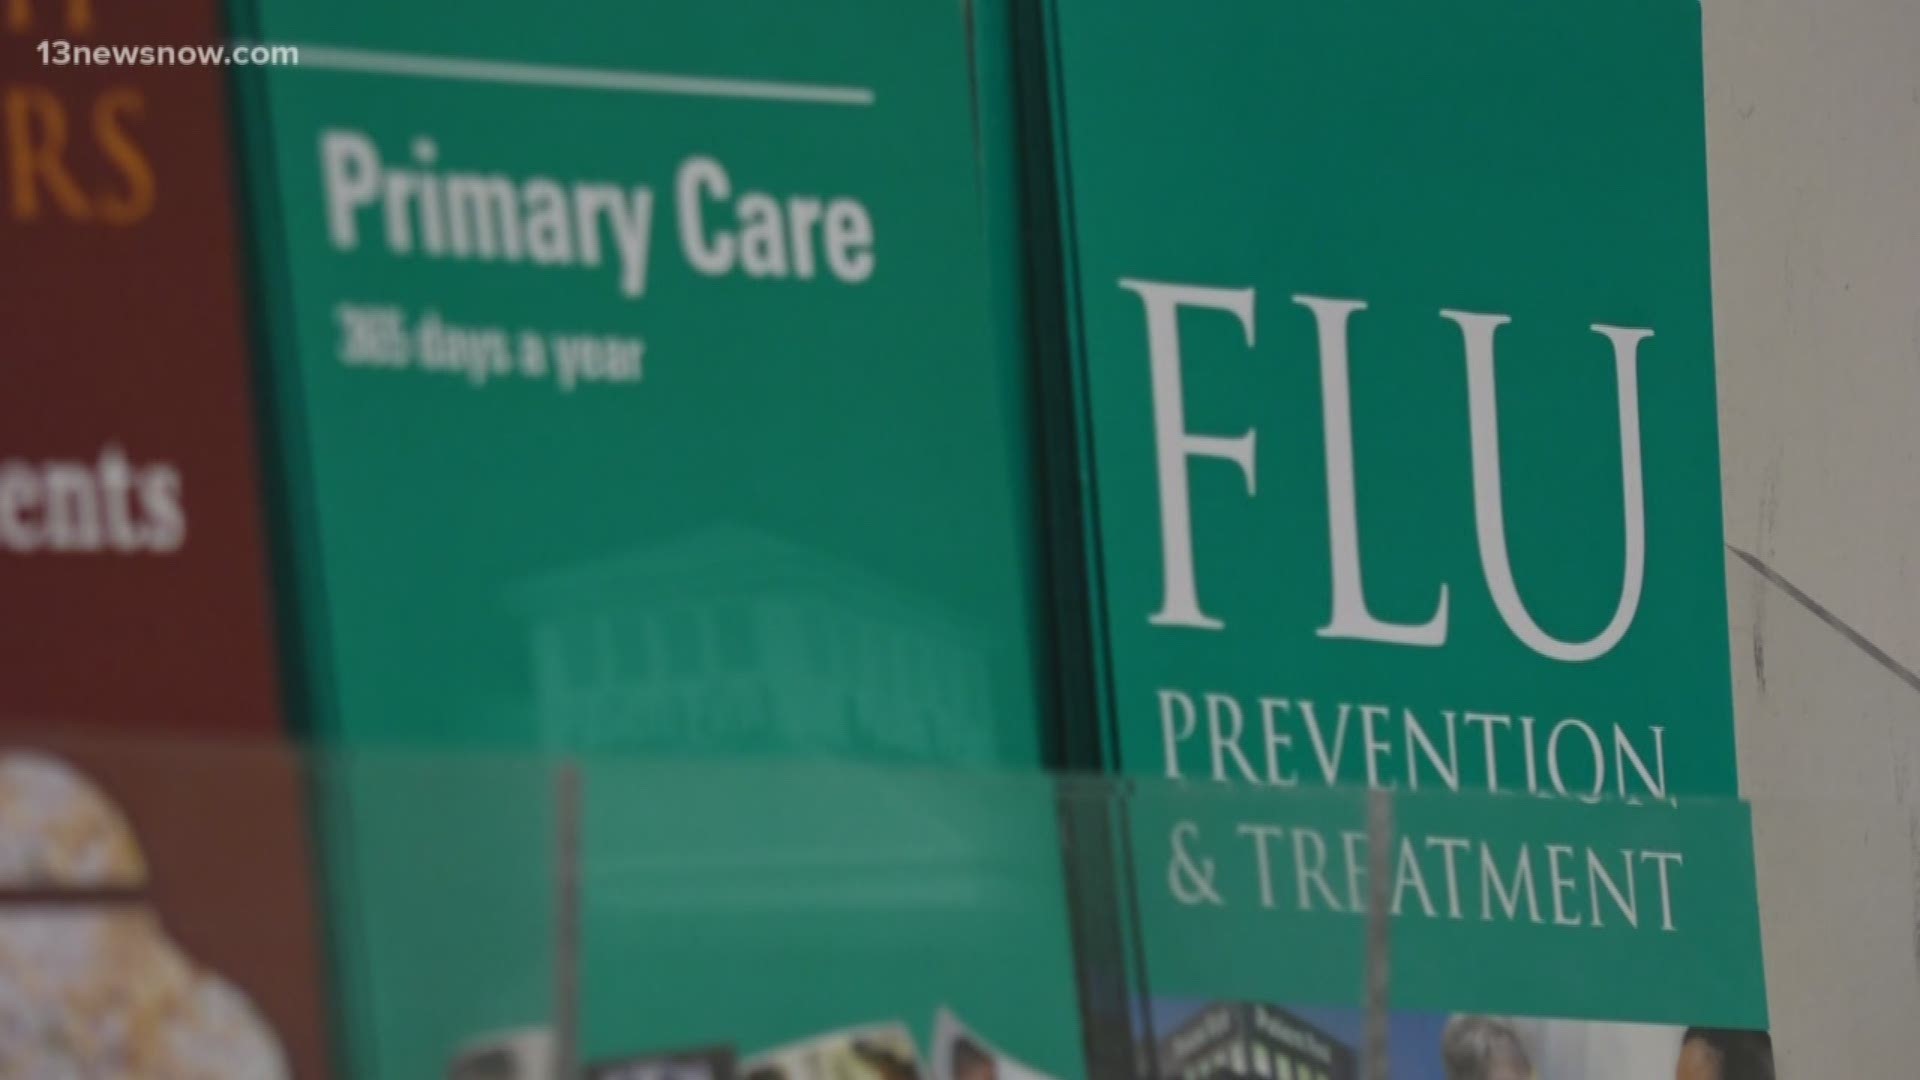 Dr. Aldo Dumlao at Patient First says there are two strains of flu: A and B. He adds many people are also being diagnosed with another deadly infection.